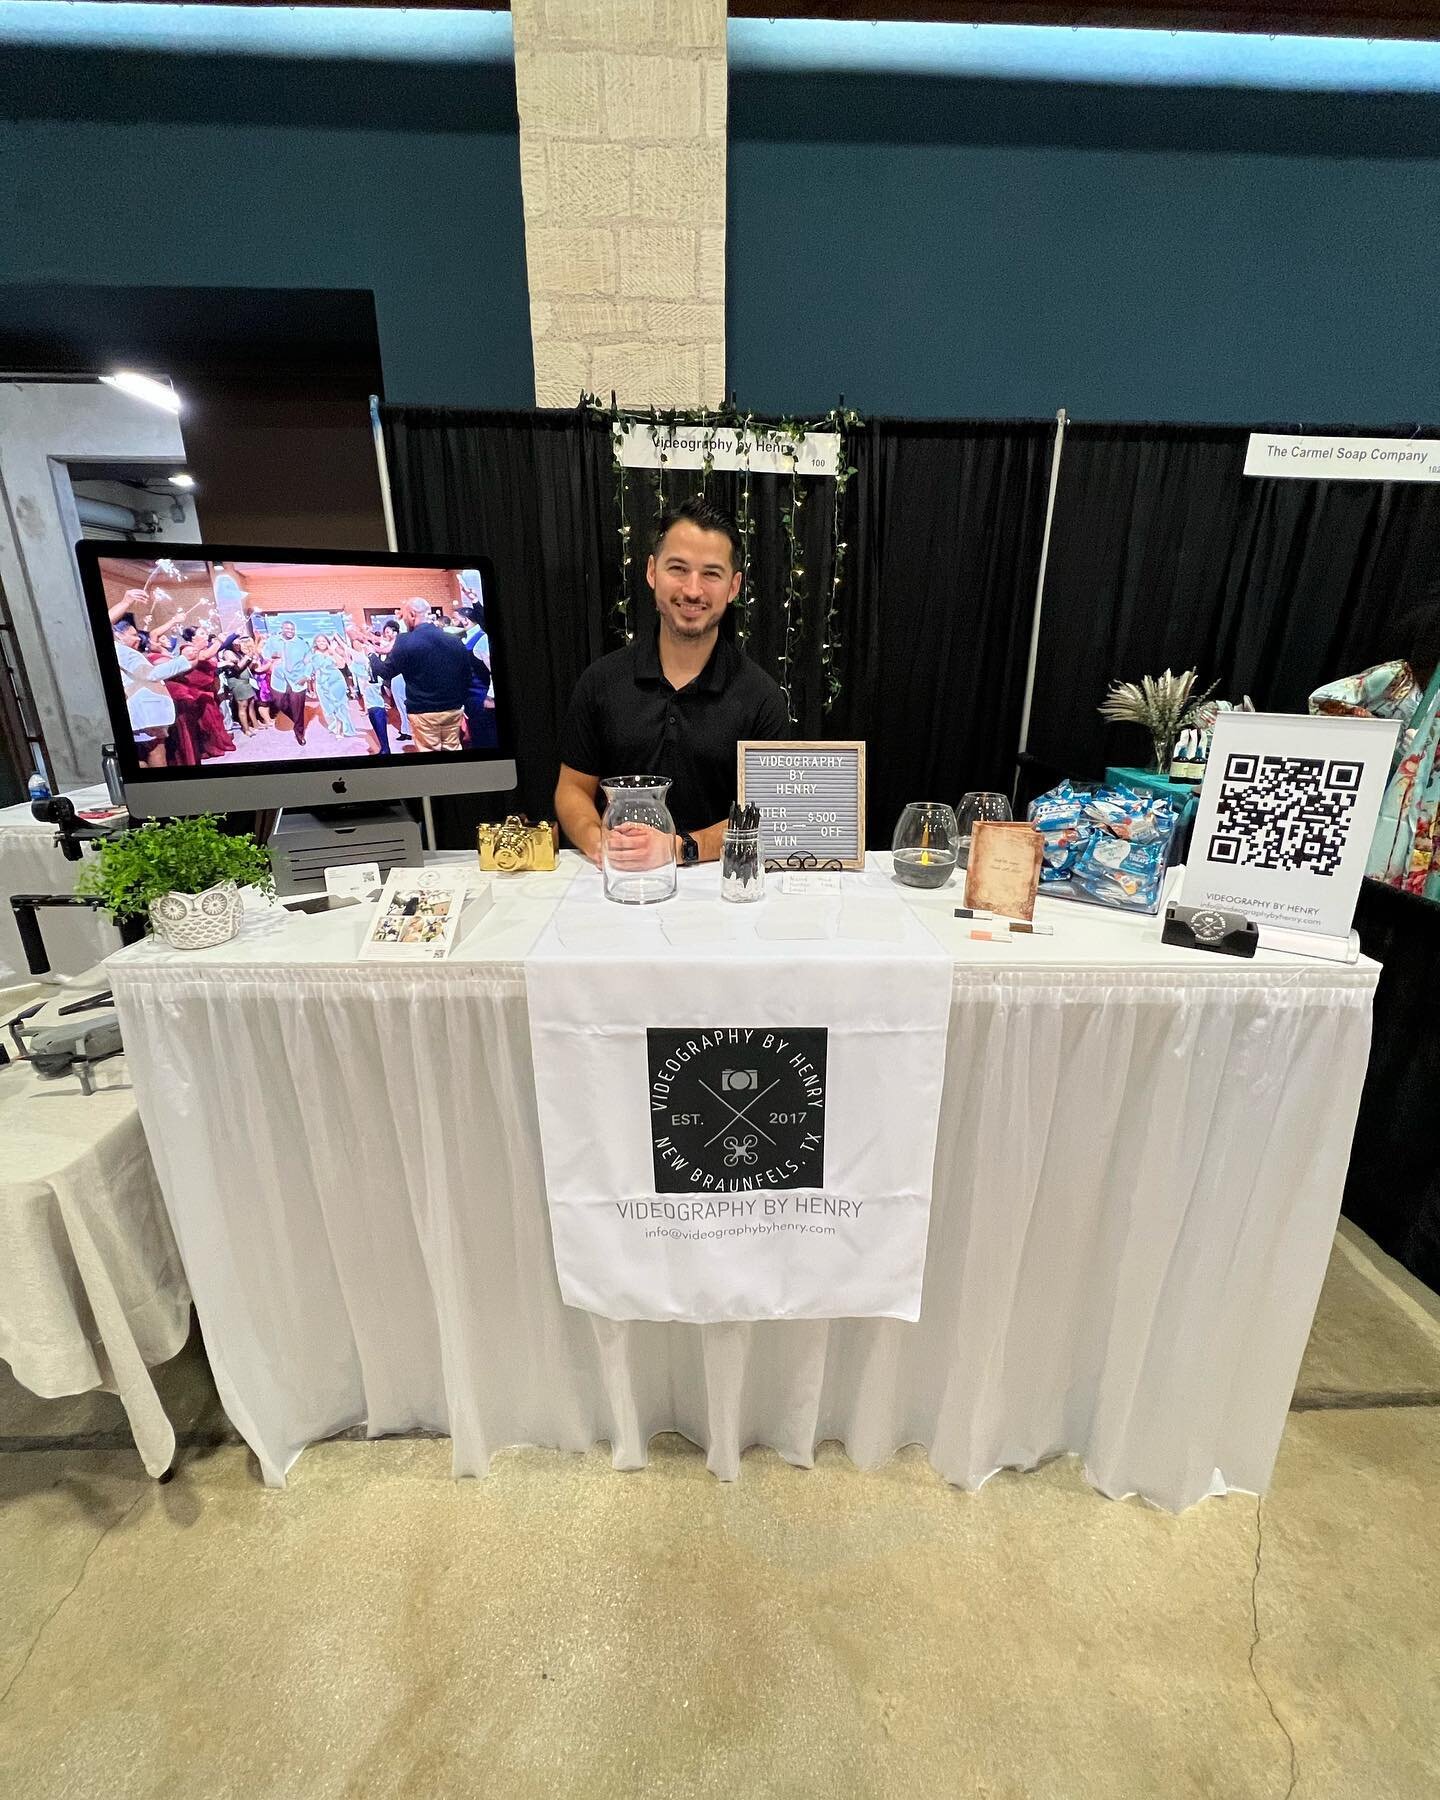 First wedding expo was a major success! Thank you to everyone who stopped by to chat, @weddingfairshowsa for hosting this event, and special shout out to my fianc&eacute; @_allysa207 for all your help. Results for the $500 raffle will be posted later